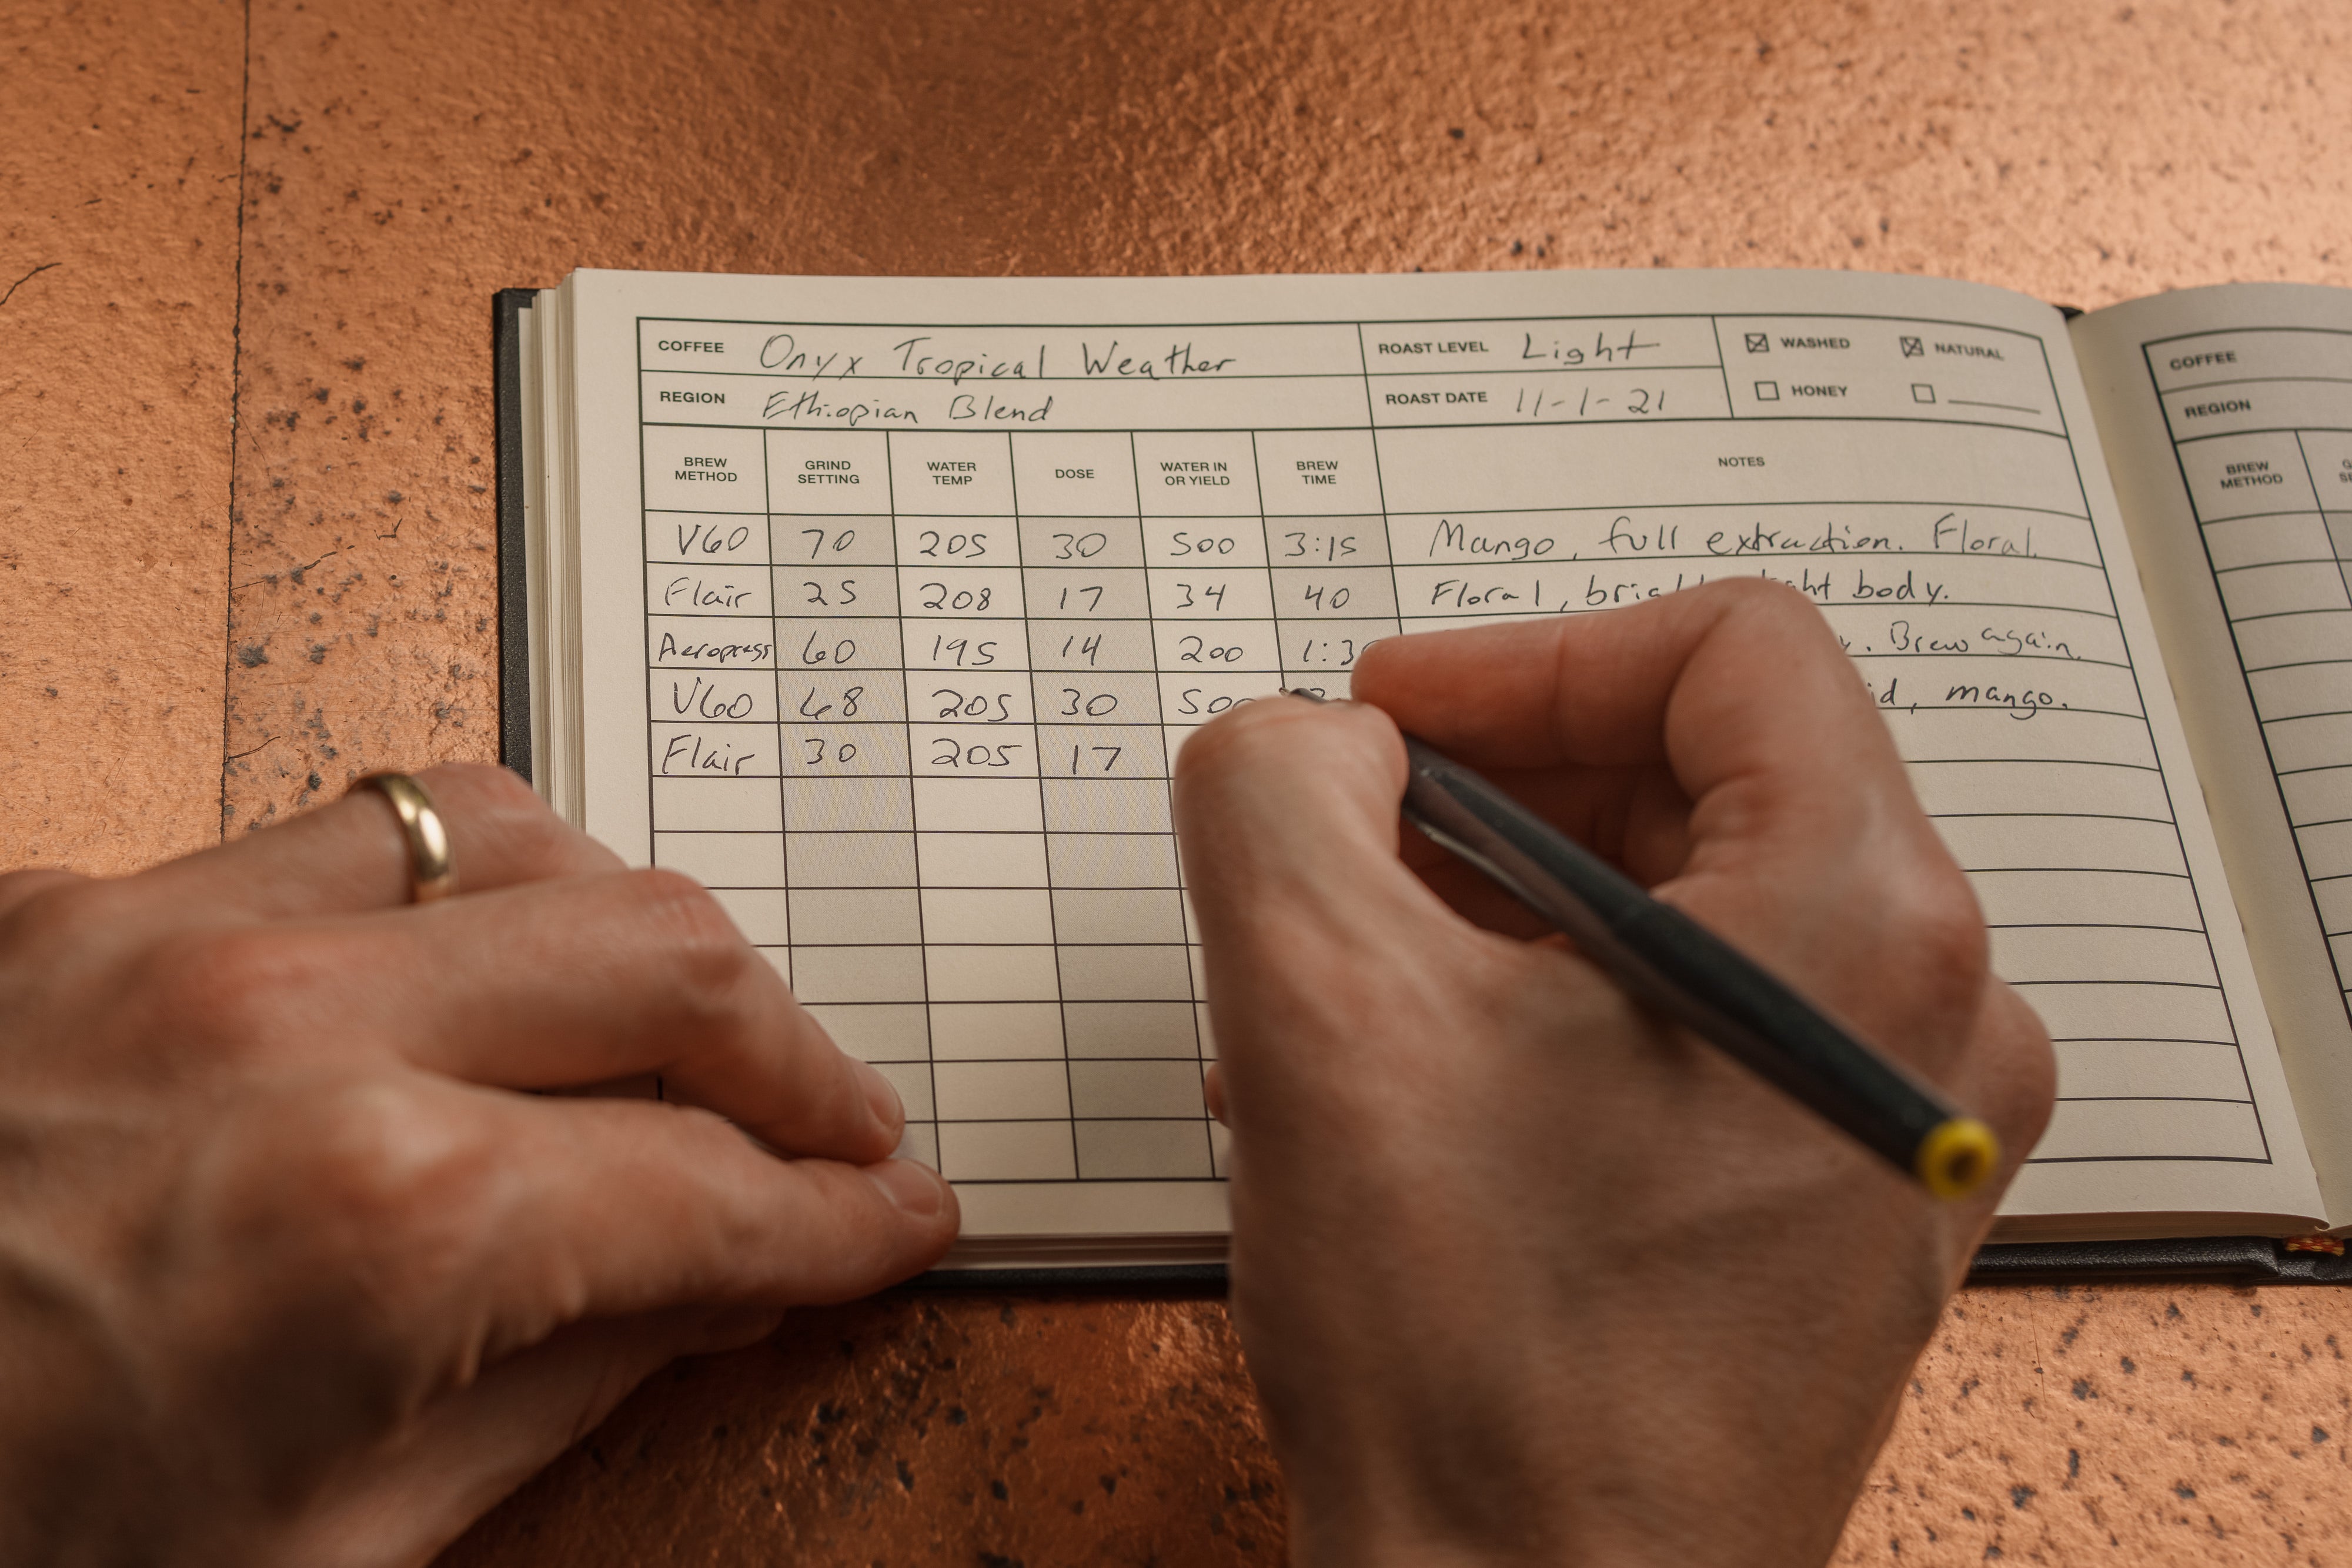 The Coffee Brewer's Logbook